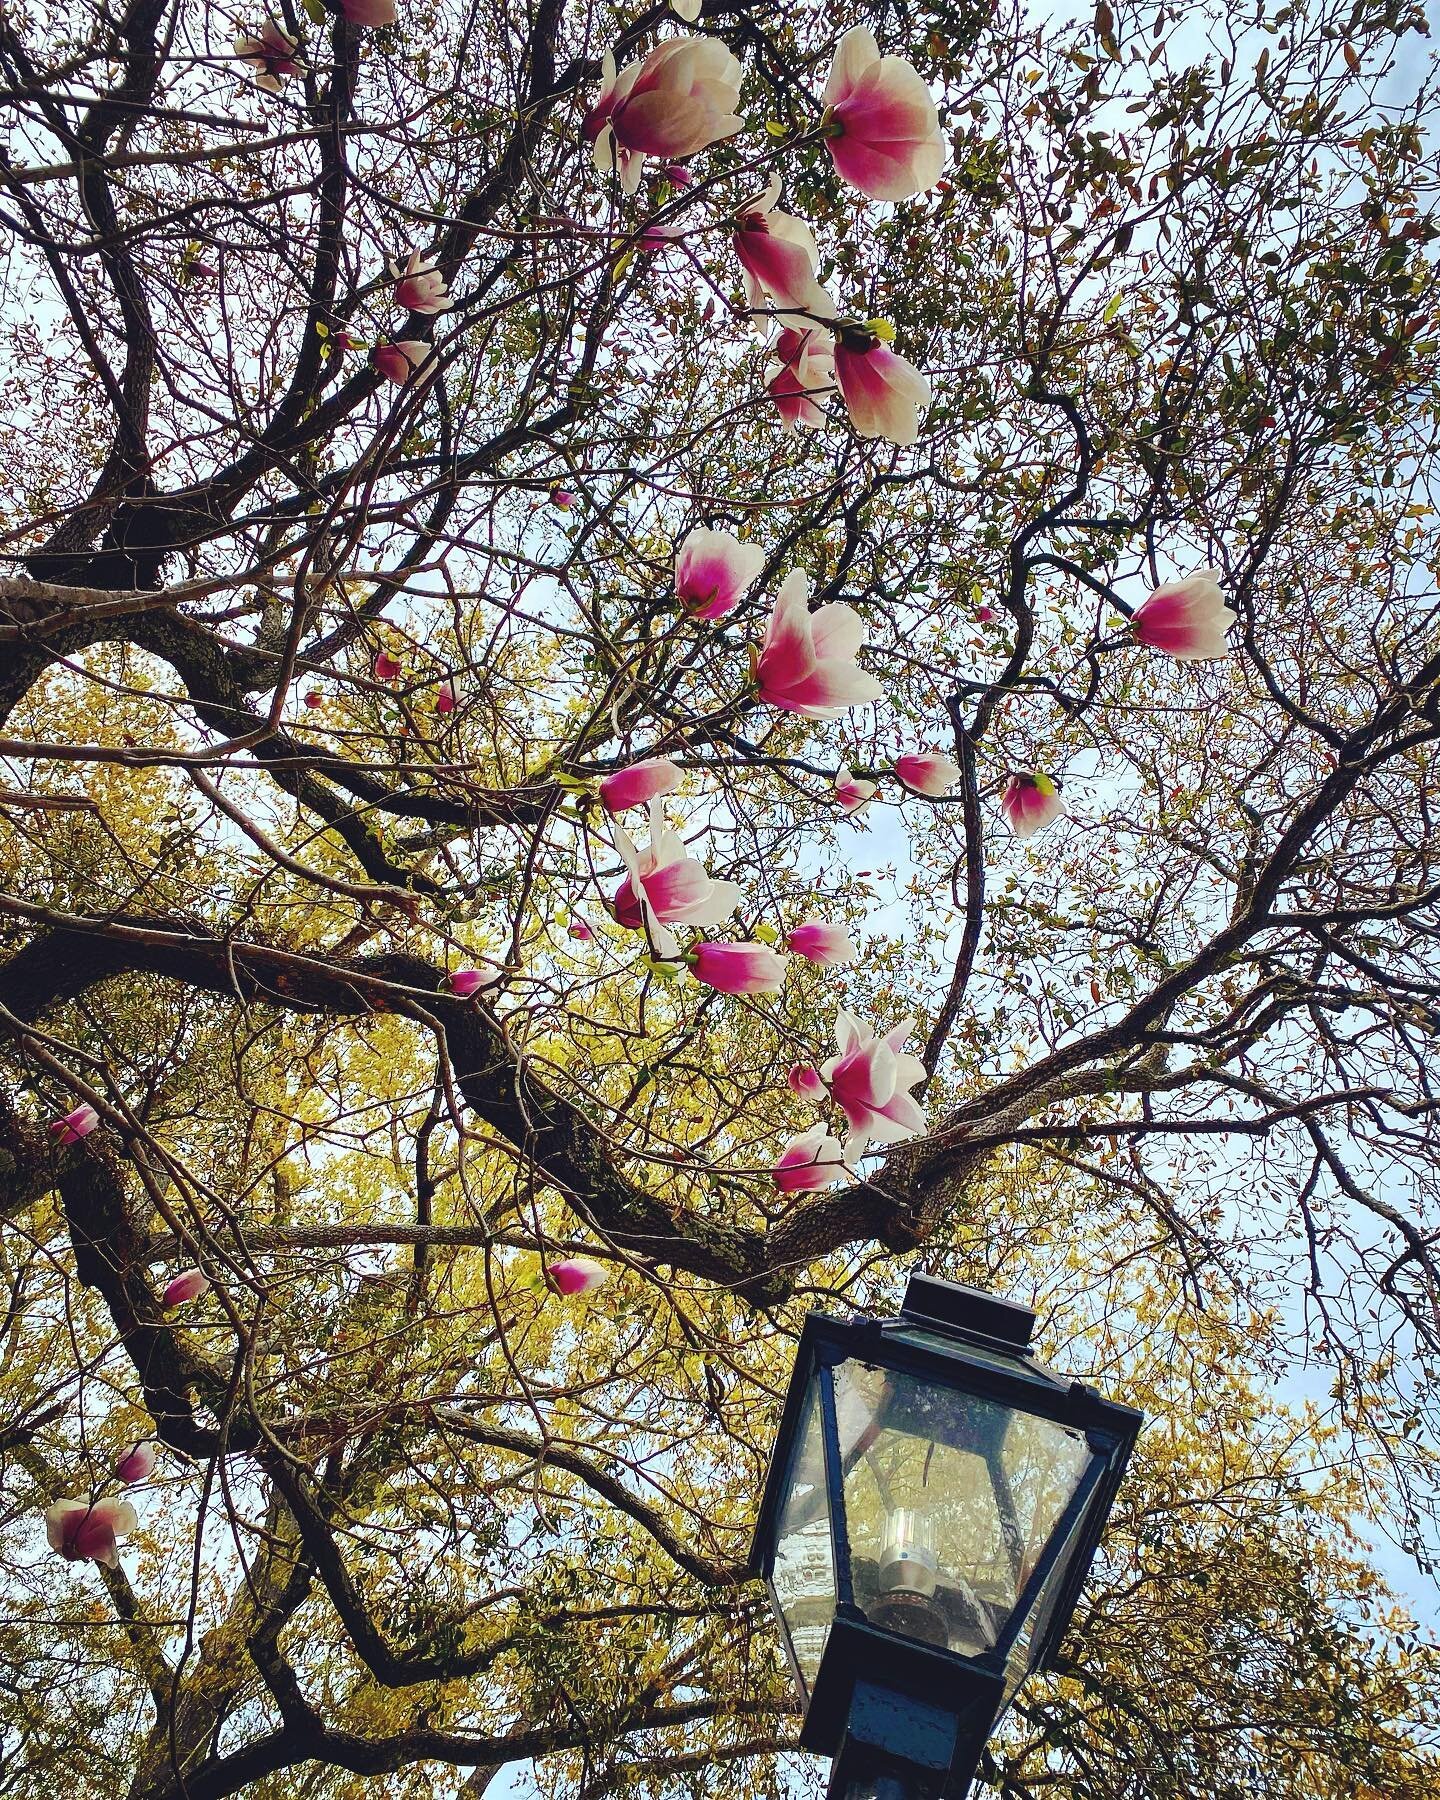 Tulip magnolia blooms for my bday #simplelife #prettylittlething #petalsandblooms #lookup #pursuepretty